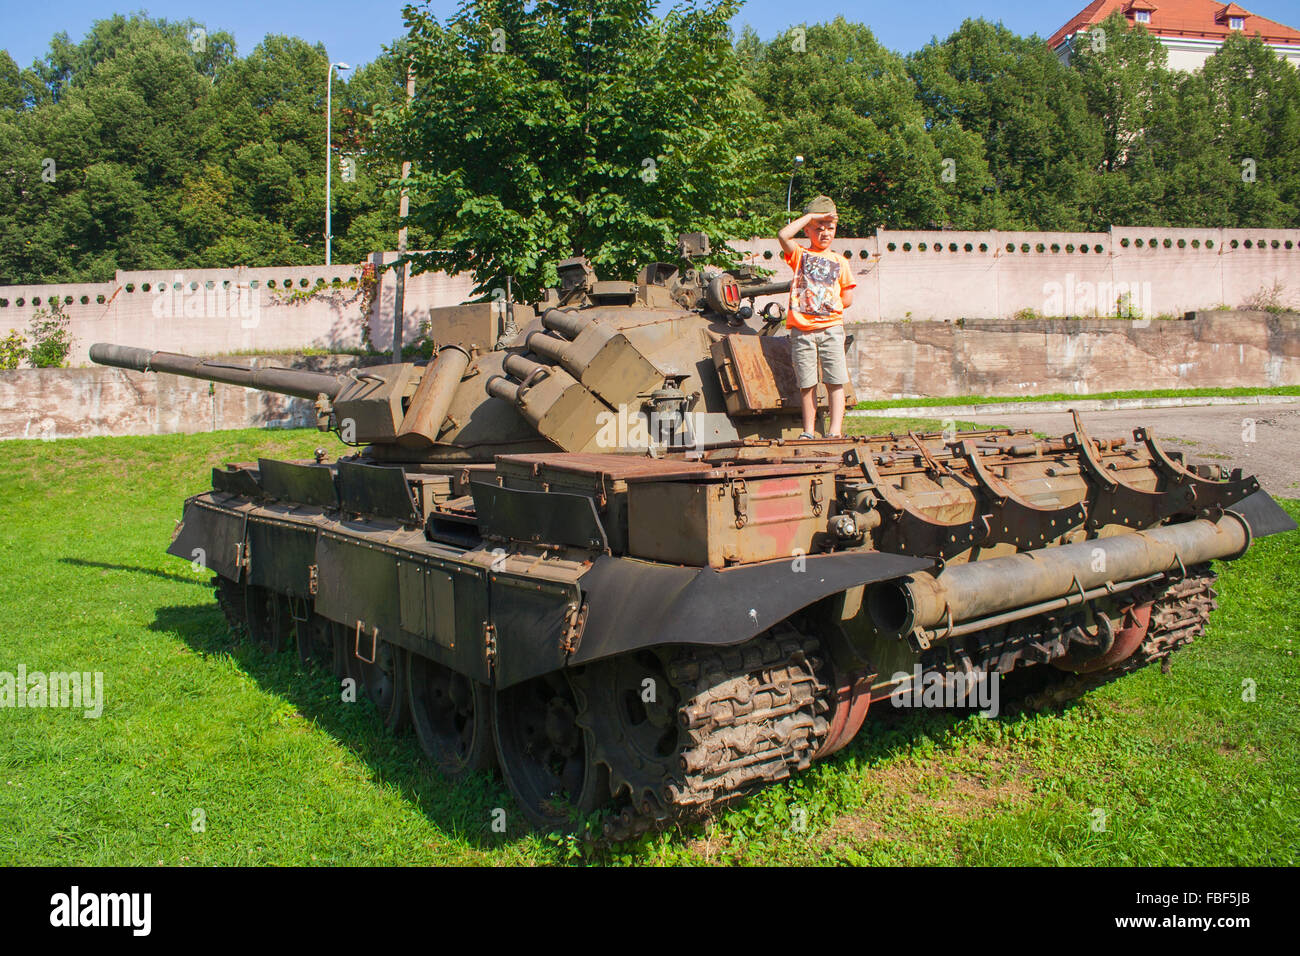 War Machinery and Transport Museum, Vilnius, Lithuania Stock Photo